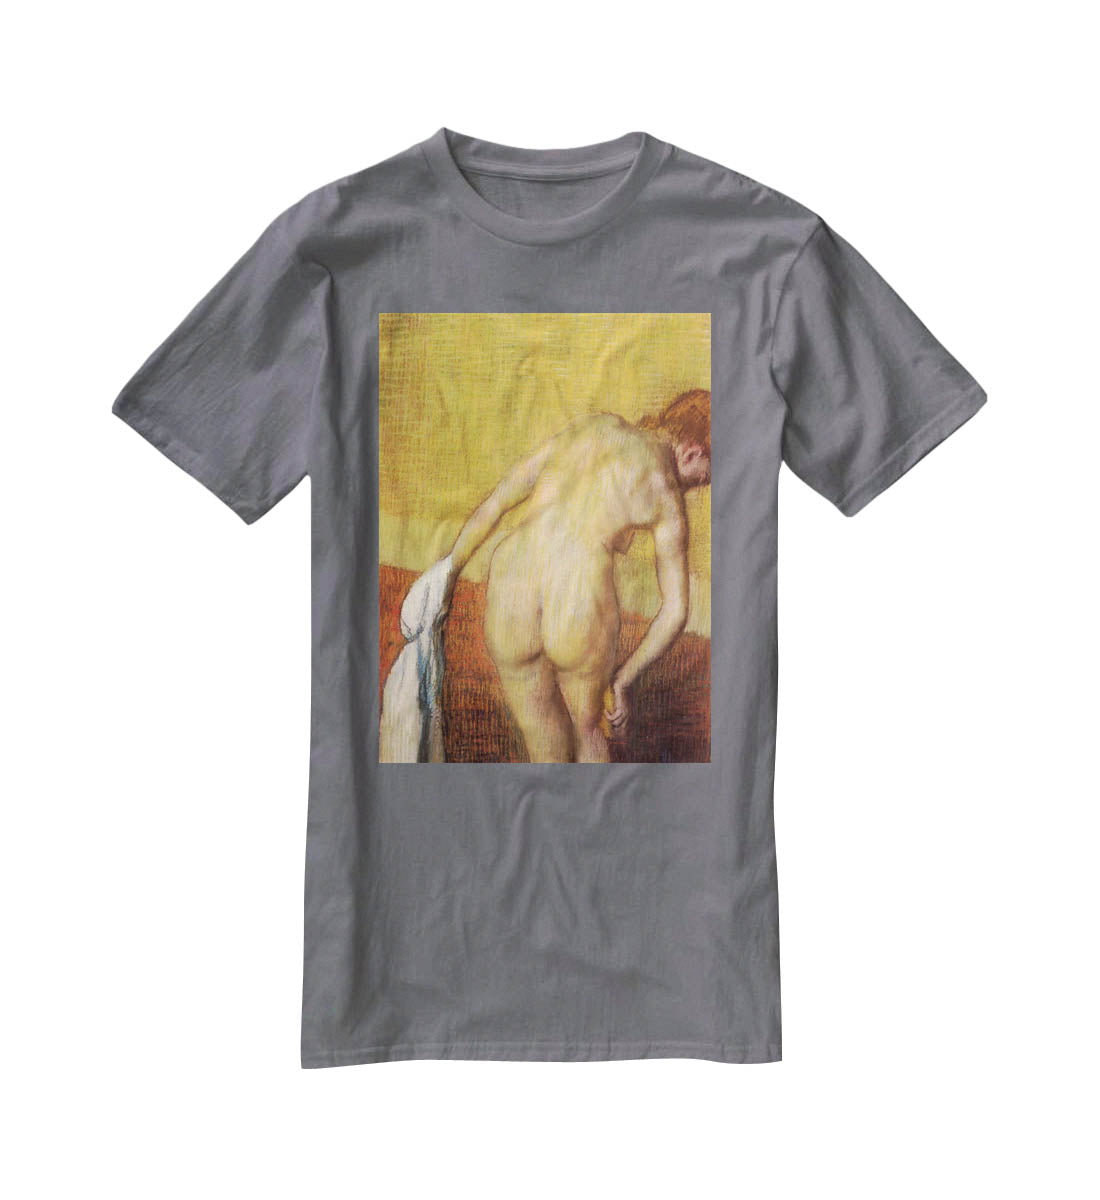 Woman Drying with towel and sponge by Degas T-Shirt - Canvas Art Rocks - 3